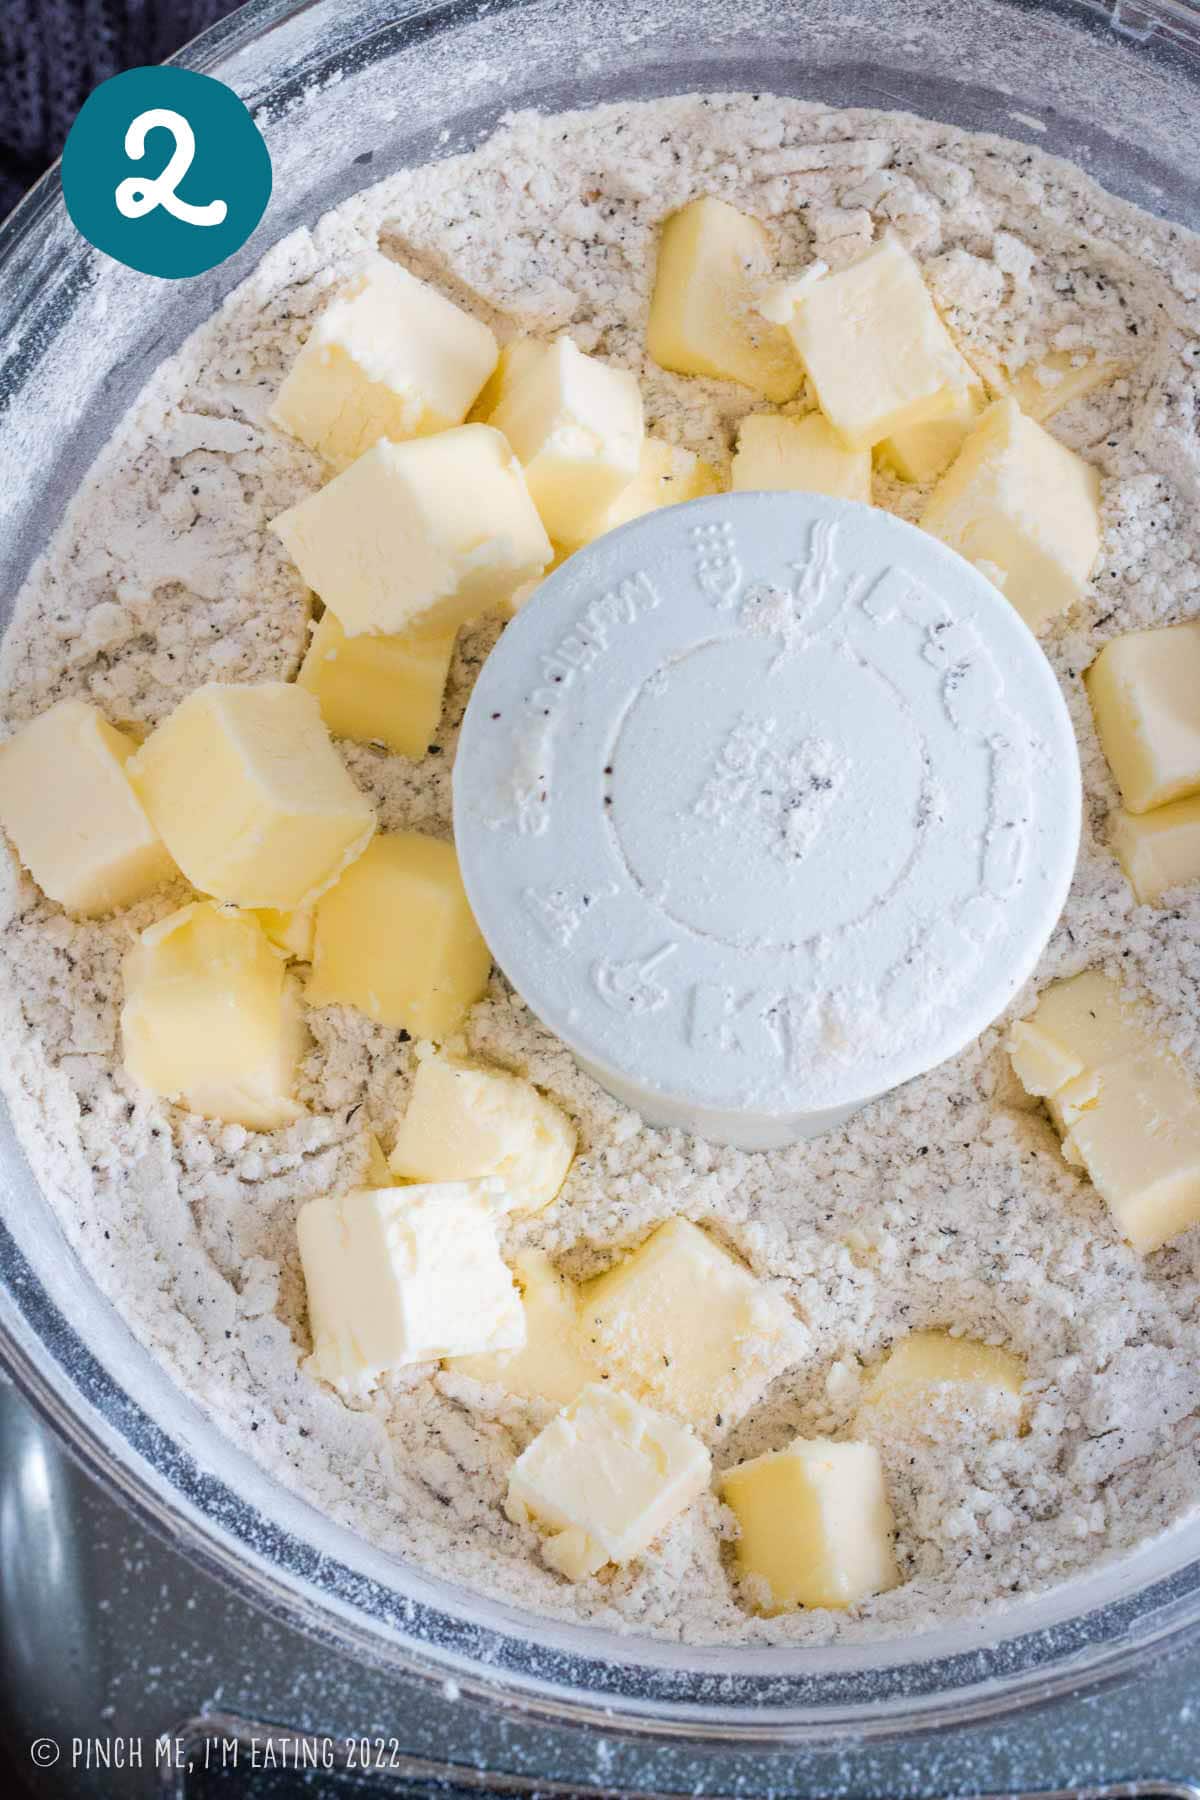 Cold butter cubes in a food processor with dry ingredients for earl grey scones.